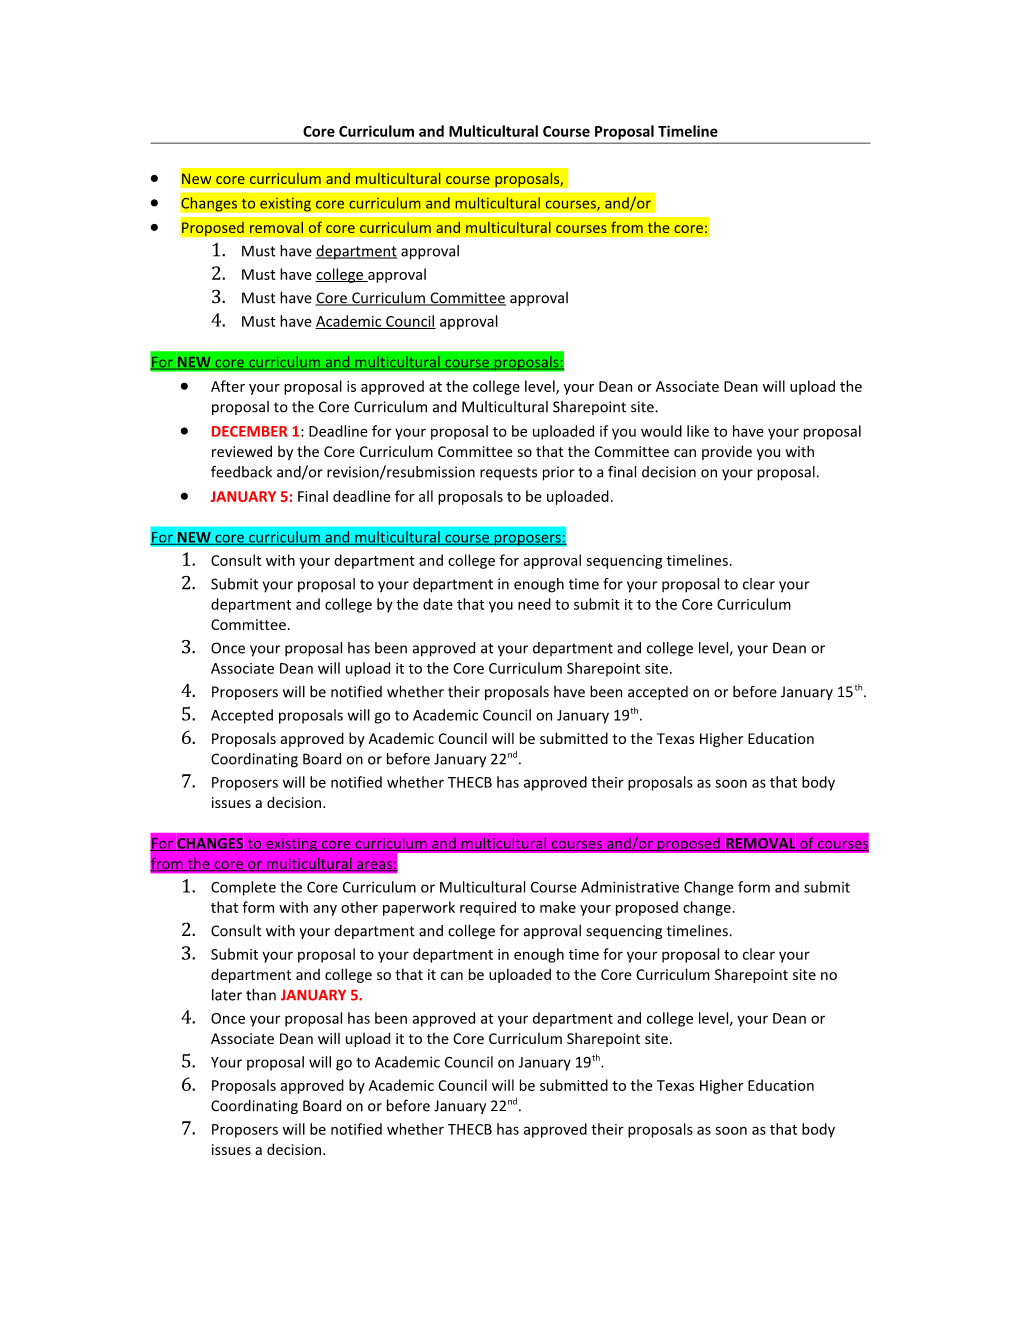 Core Curriculum and Multicultural Course Proposal Timeline